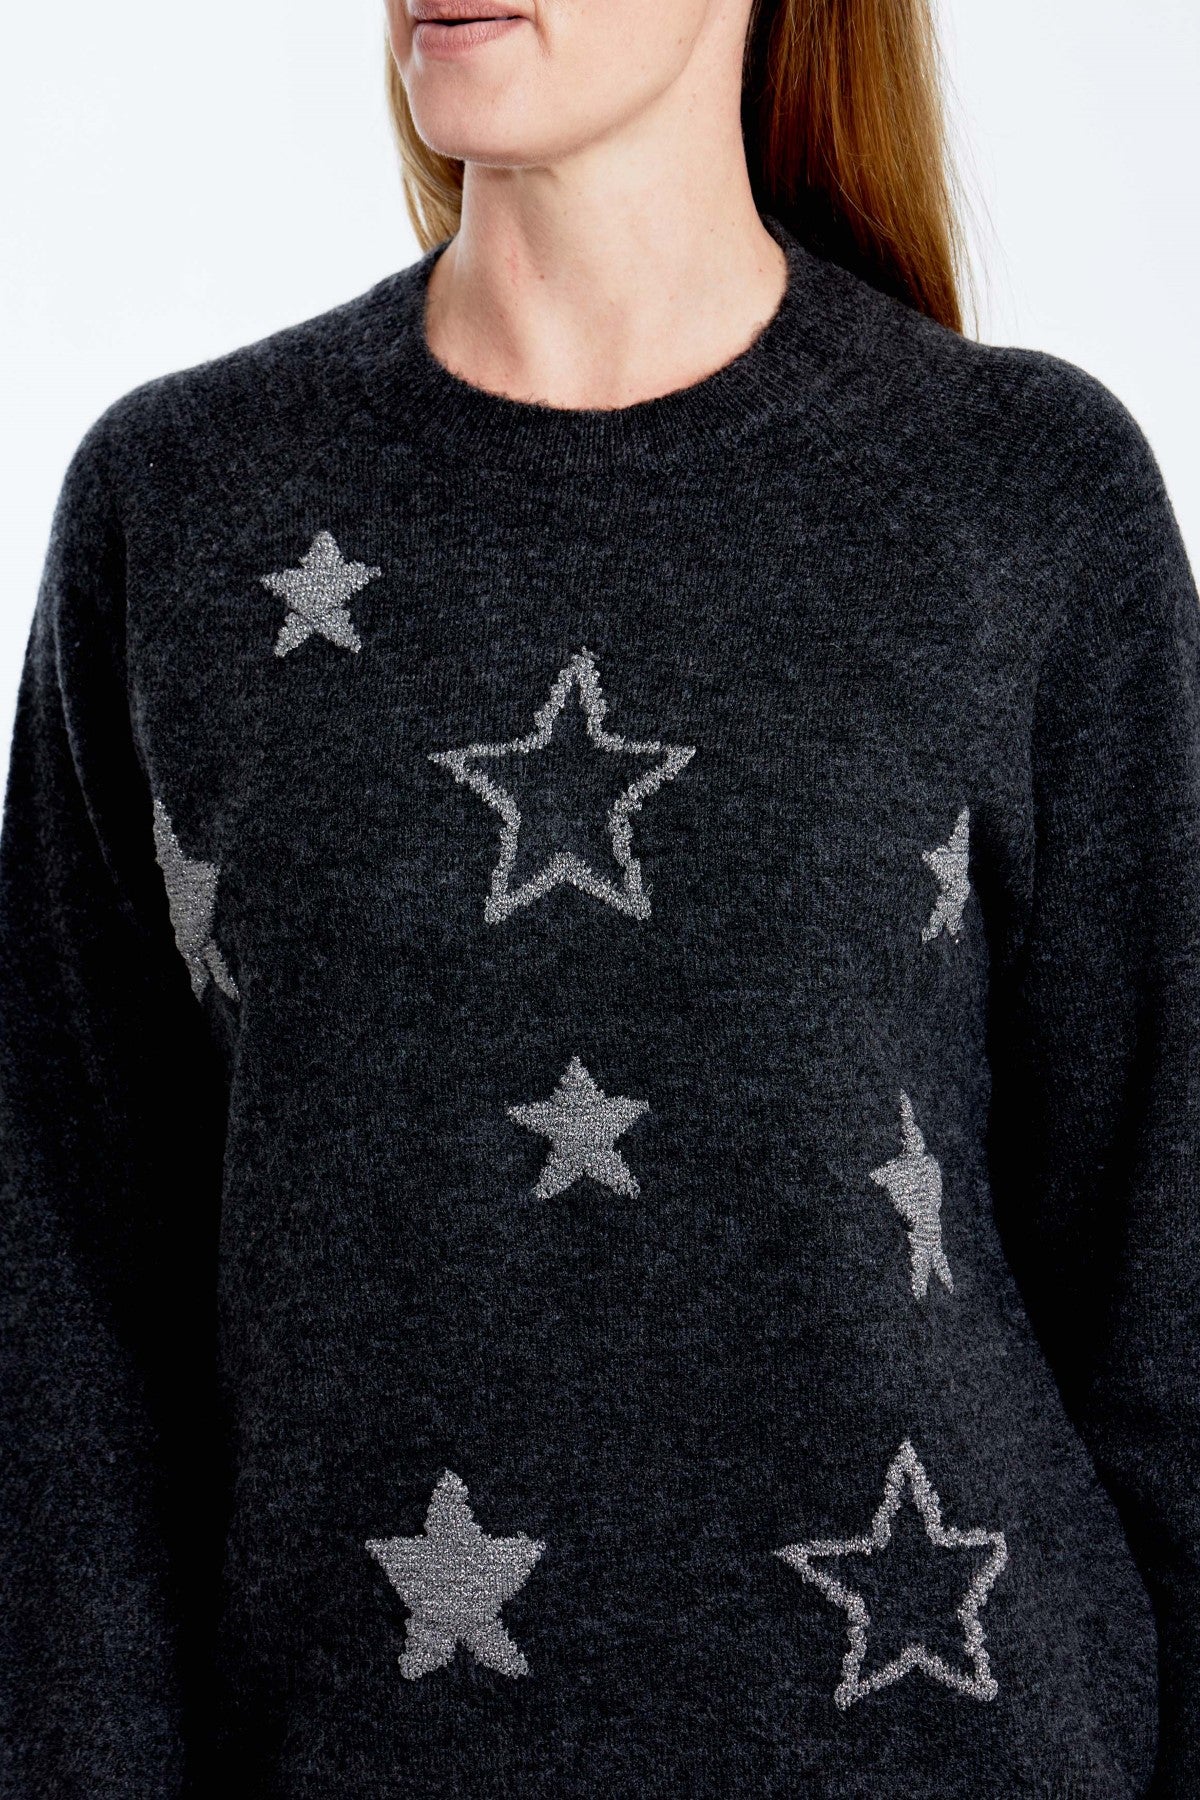 Star Pullover Charcoal / Silver